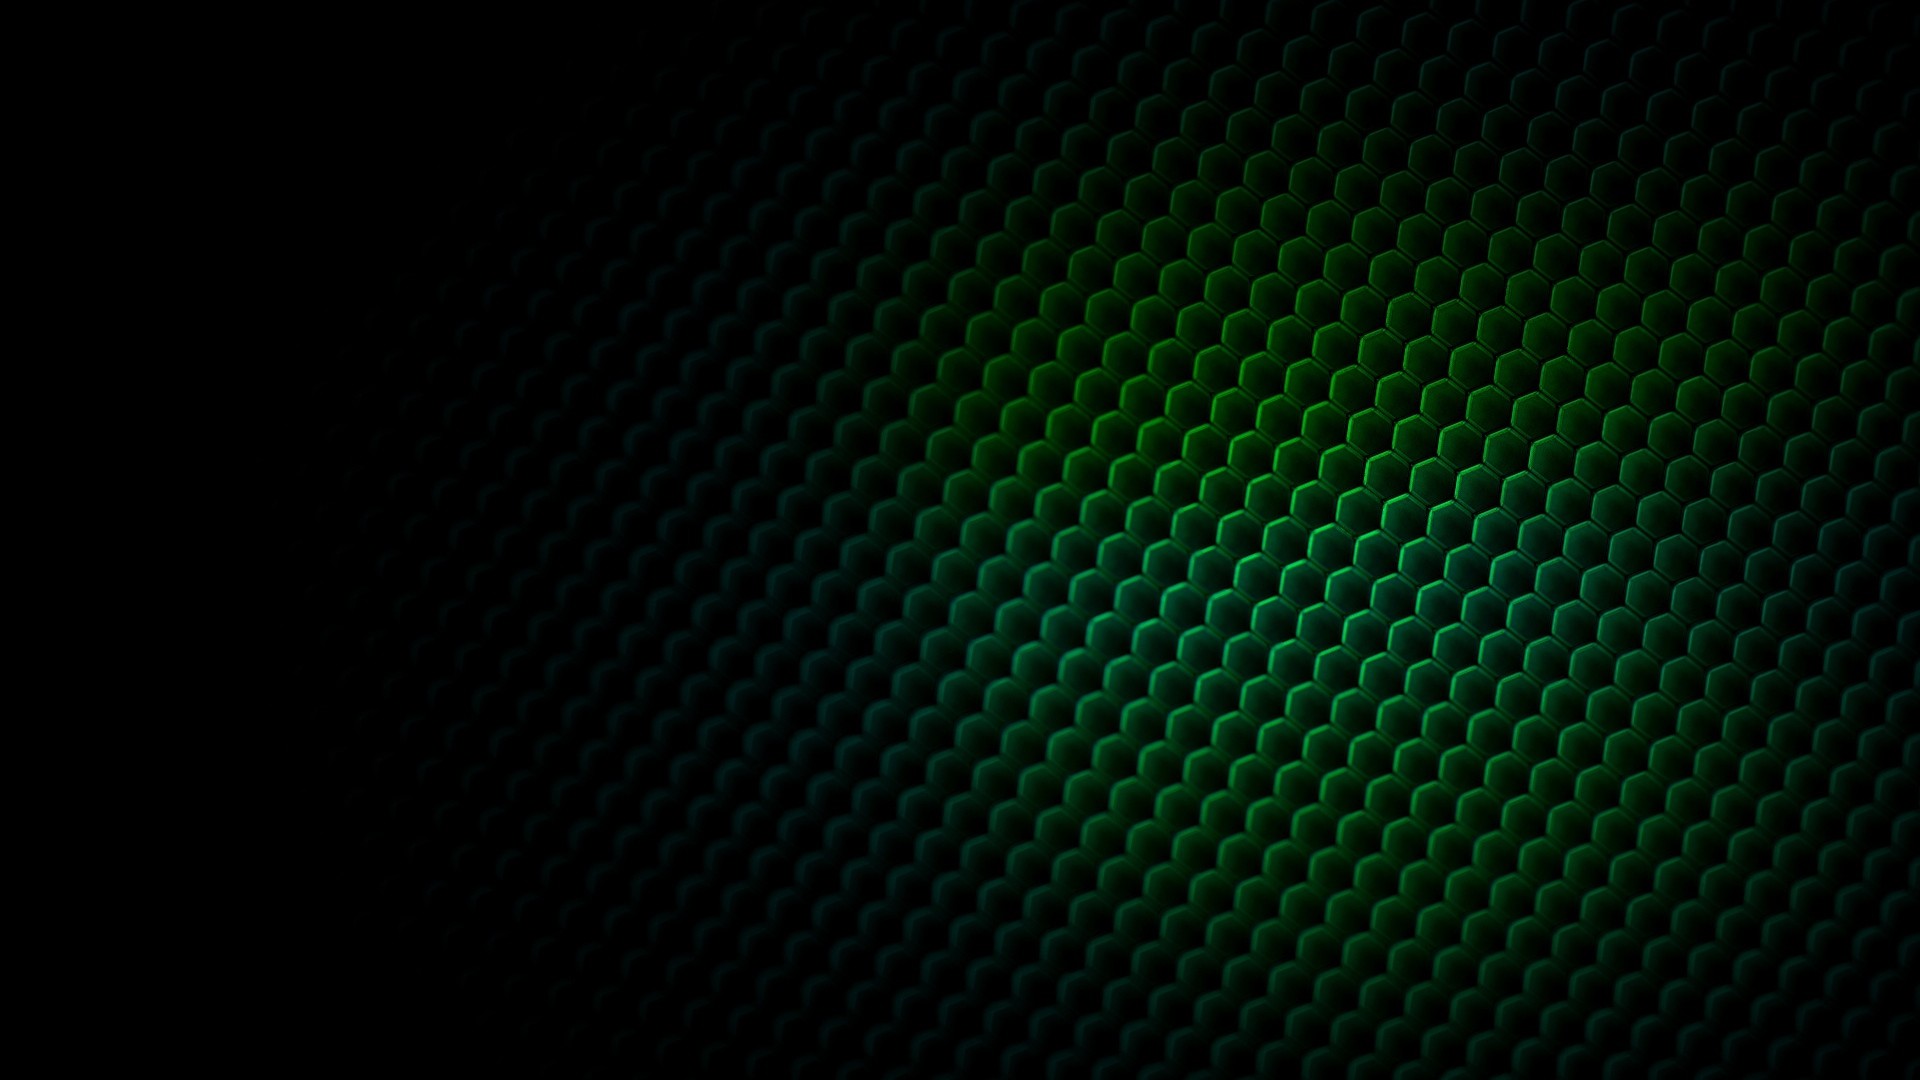 1920x1080 Dark Green Wallpapers Images For Desktop Wallpaper 1920 x 1080 px 623.08 KB  abstract black solid